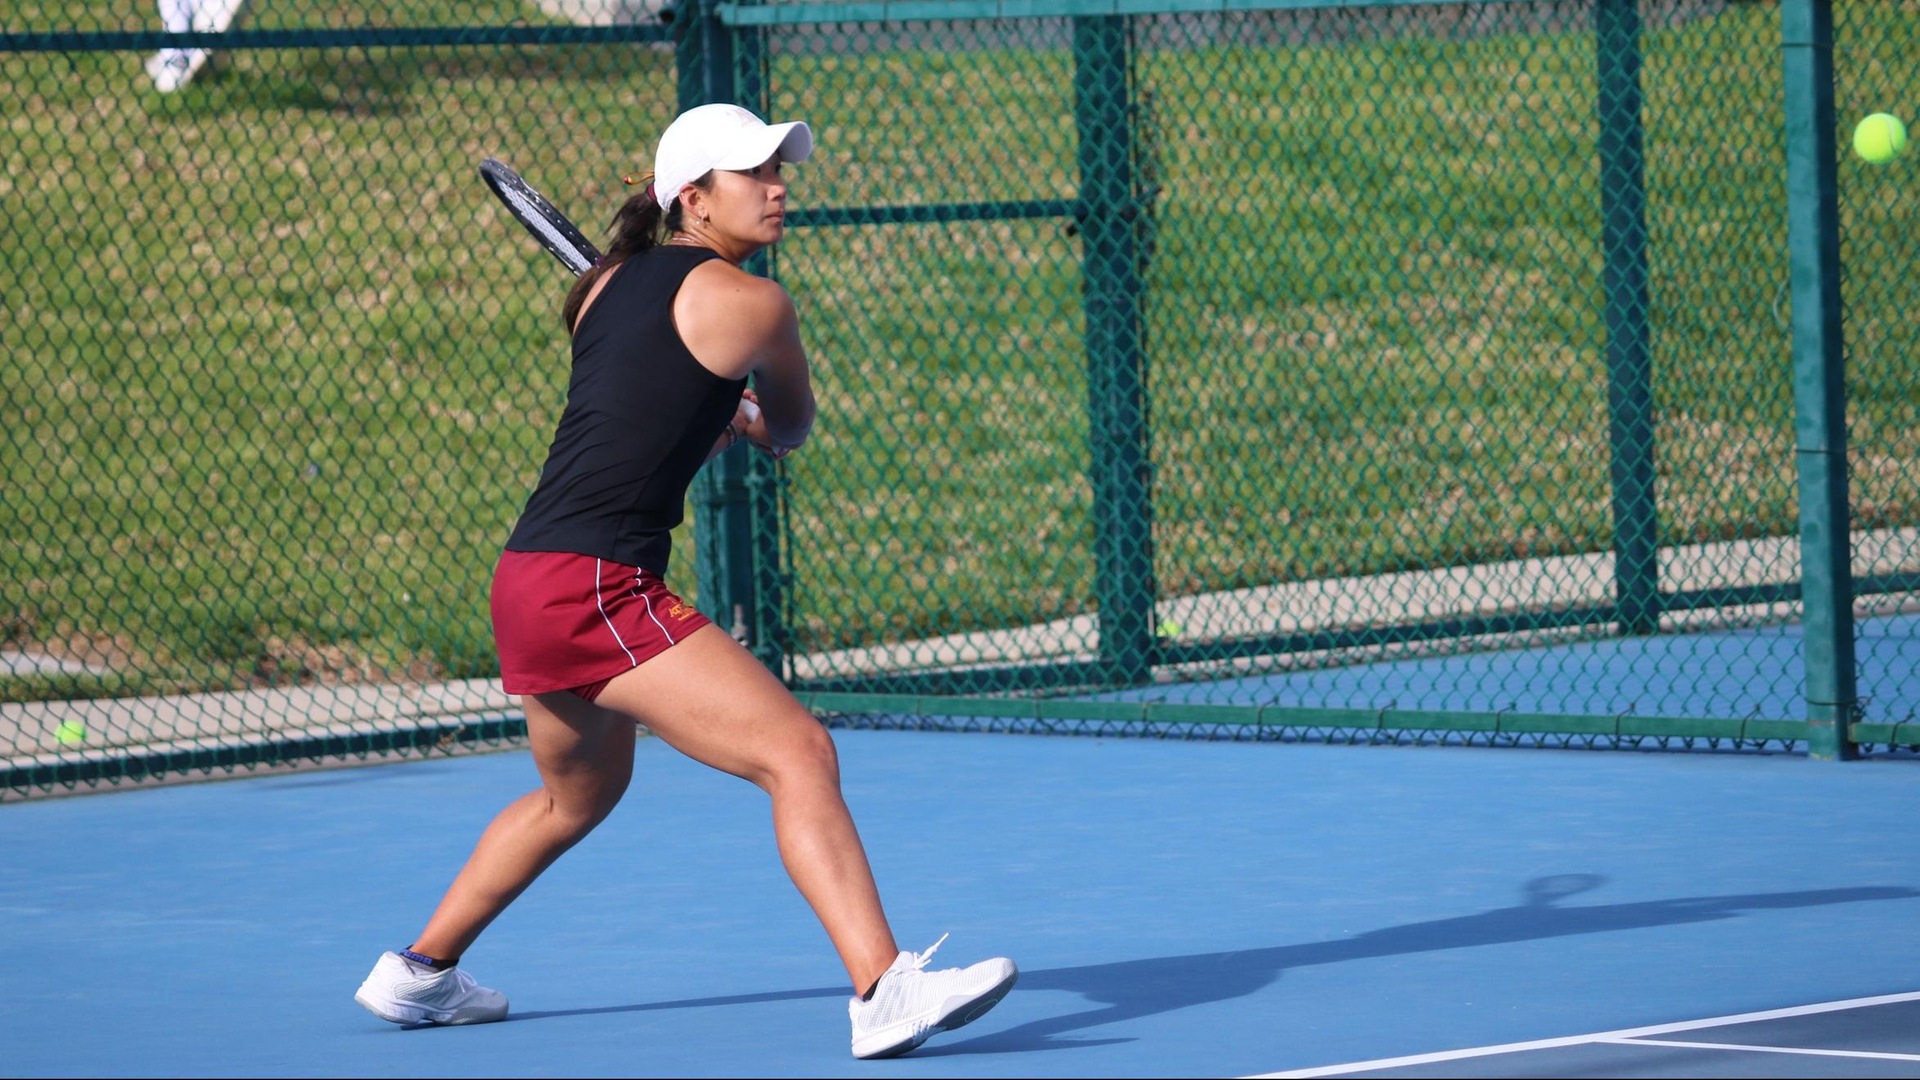 Audrey Yoon gutted out the clinching point at No. 2 singles